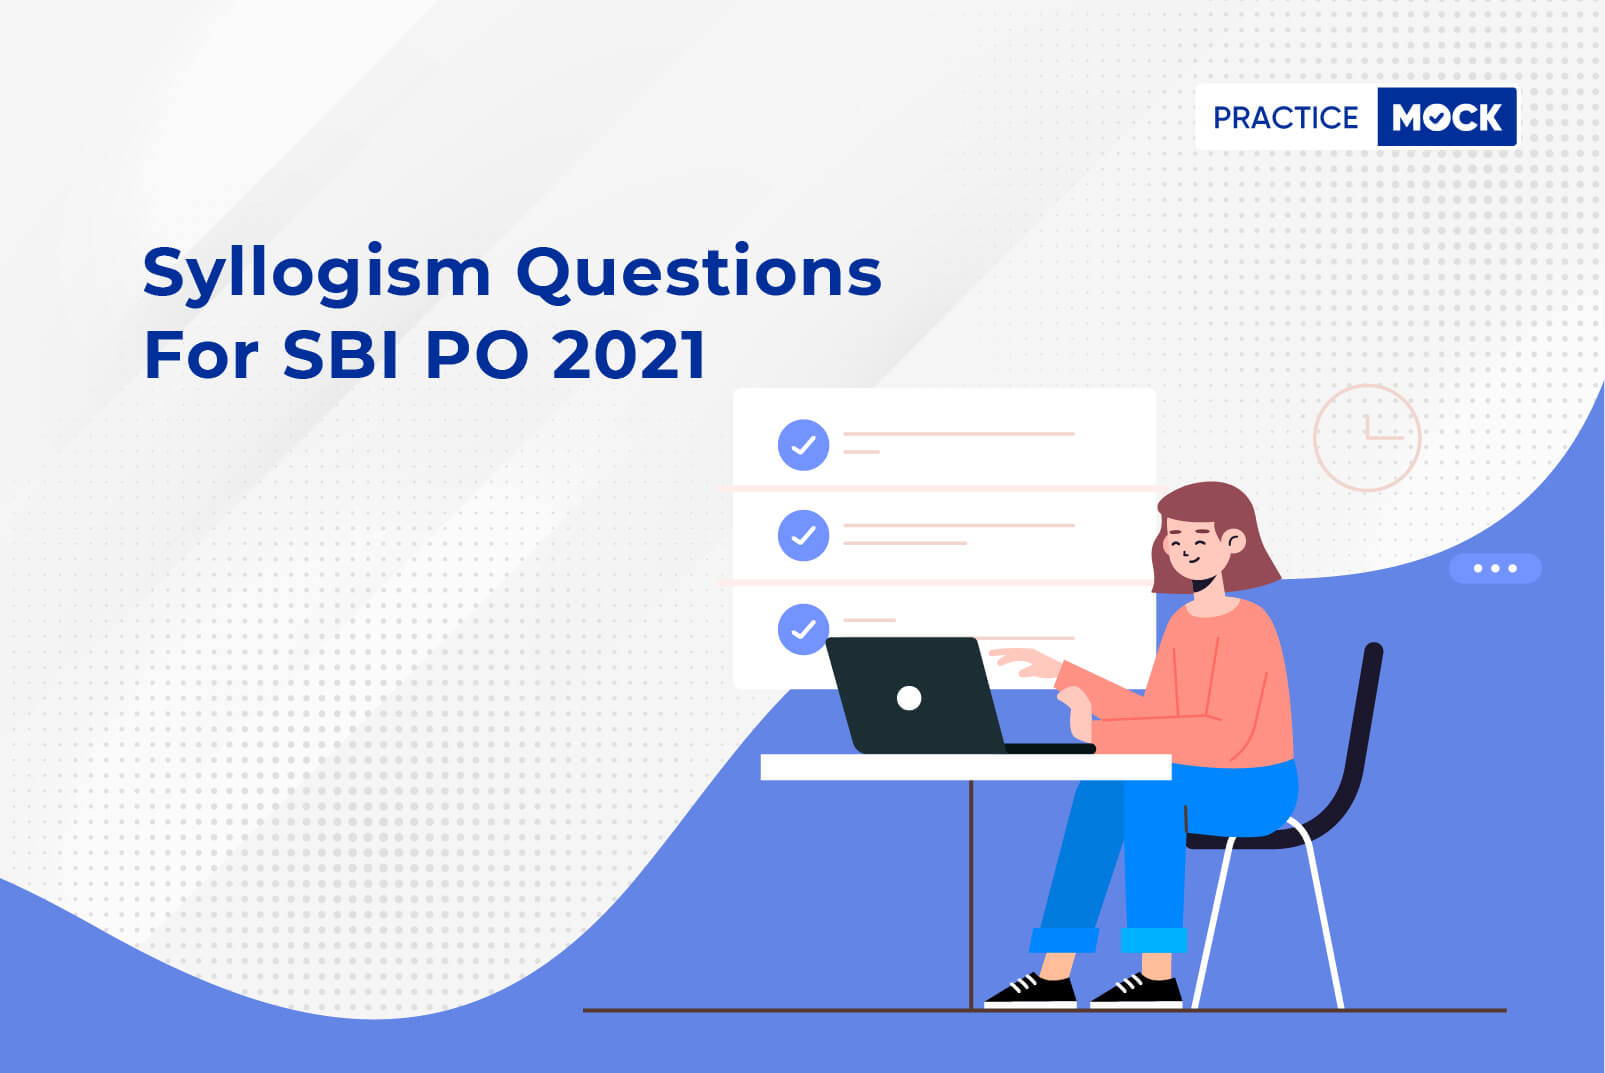 Syllogism Questions for SBI PO